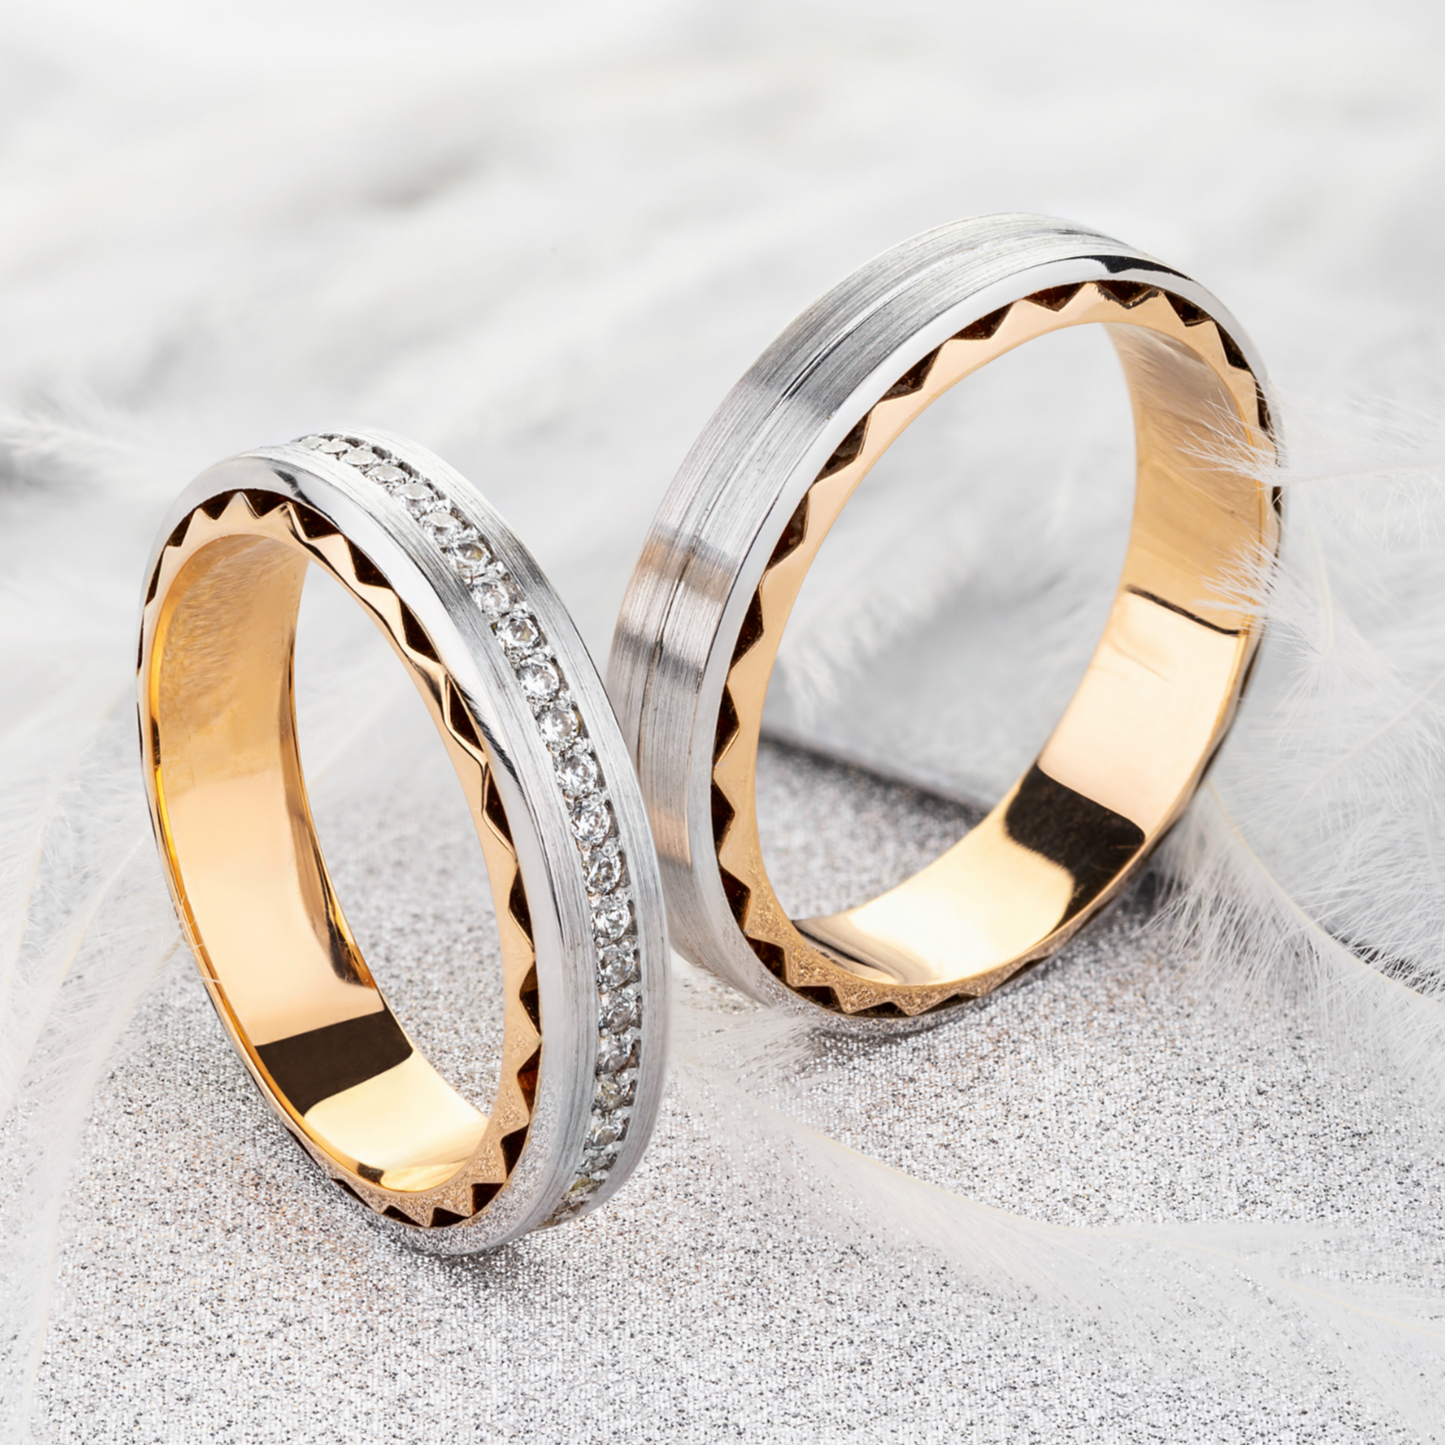 Gold wedding bands with unique design. Wedding rings set. Matching wedding bands. Couple wedding rings. Gold wedding bands set with diamonds 